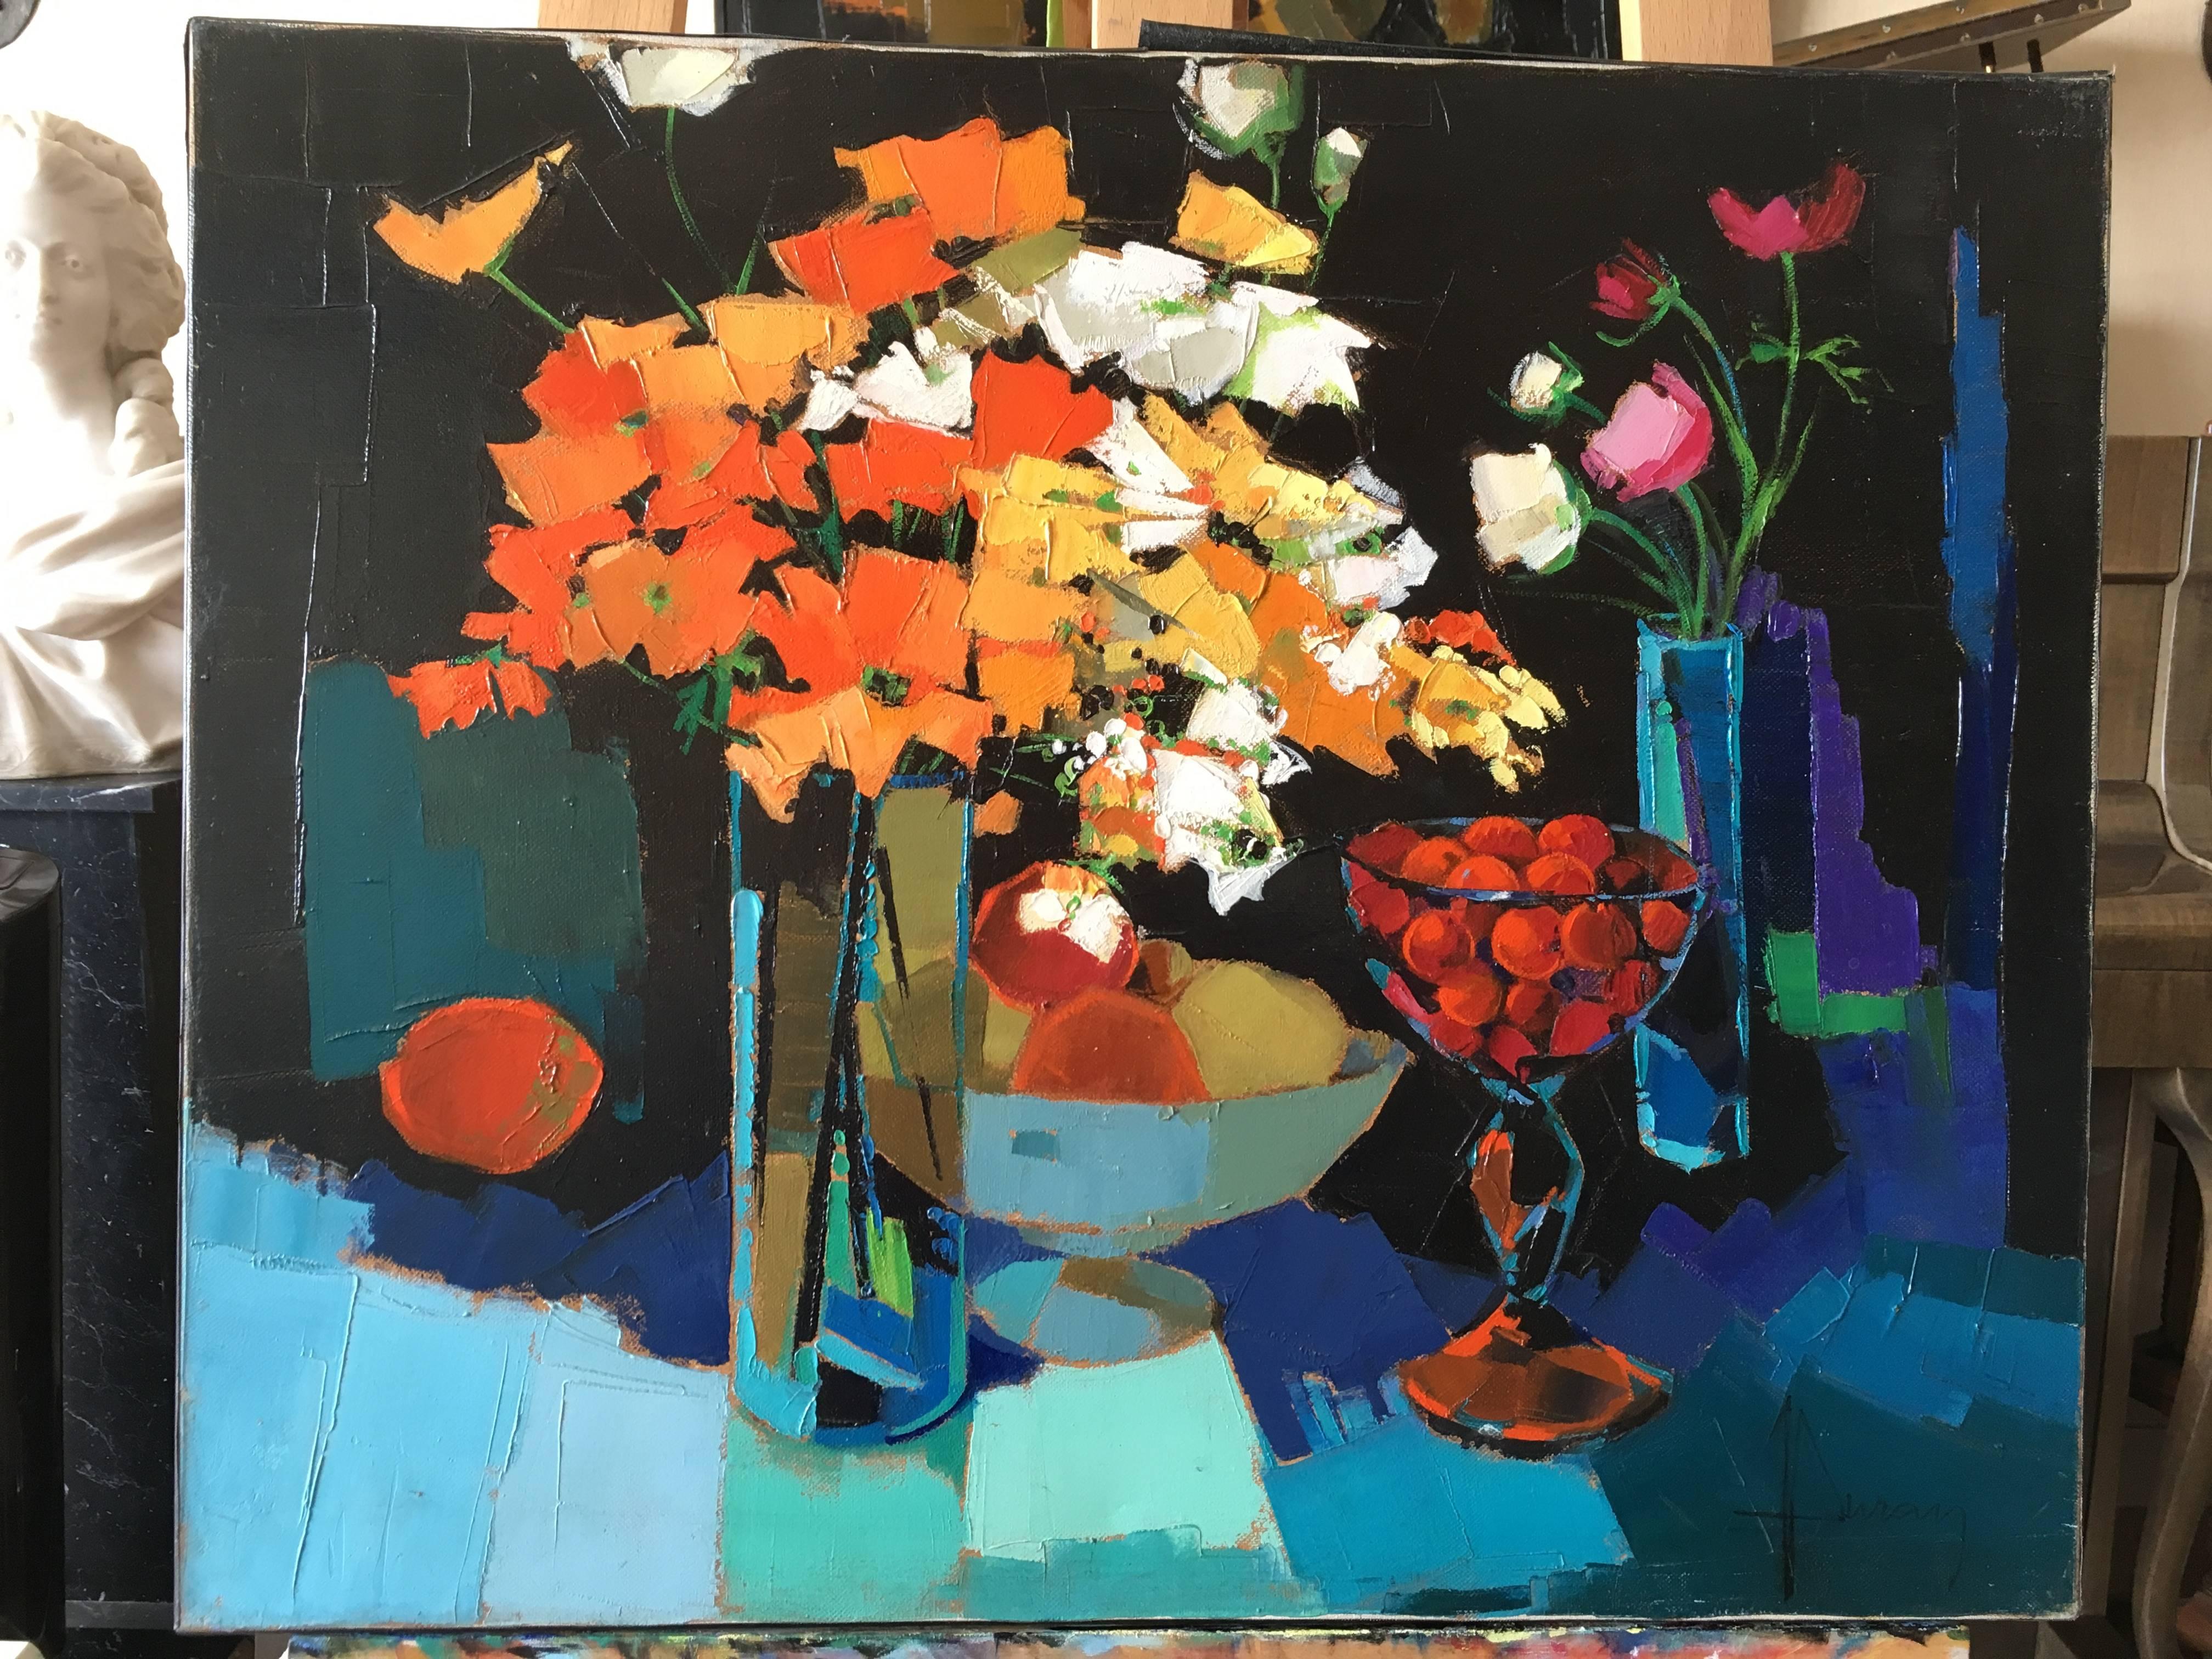 Flowers and fruits, still life  3